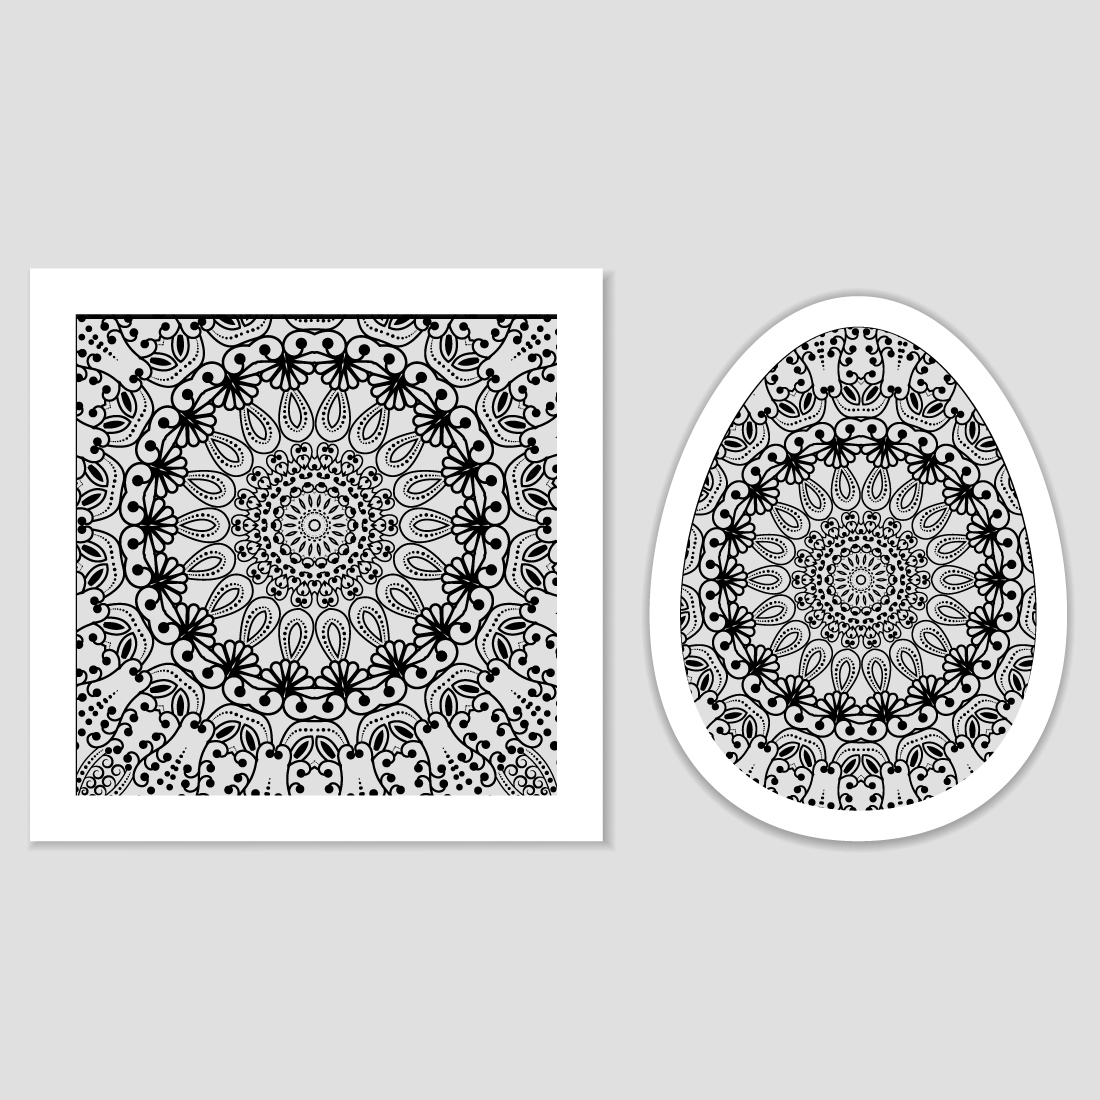 Mandala Banner Decorative Flower Mandala Background With Place For Text Cover.